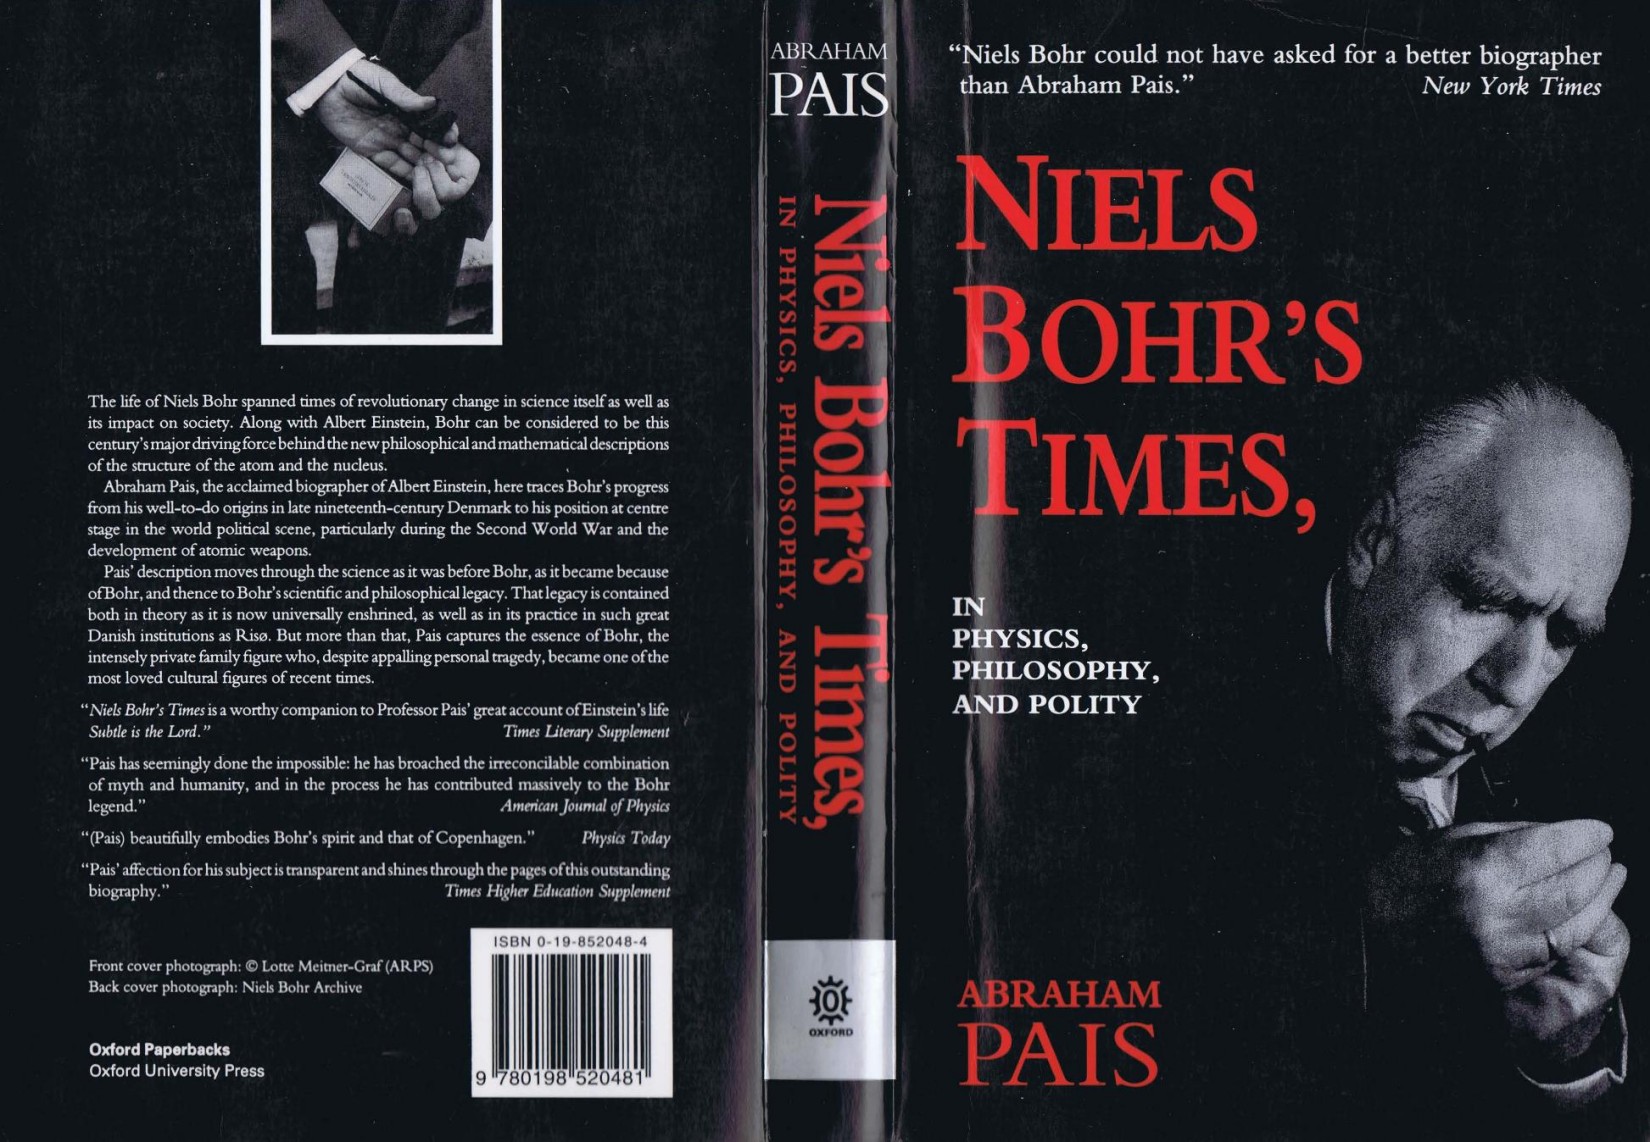 Niels Bohrs Times, In Physics, Philosophy, and Polity